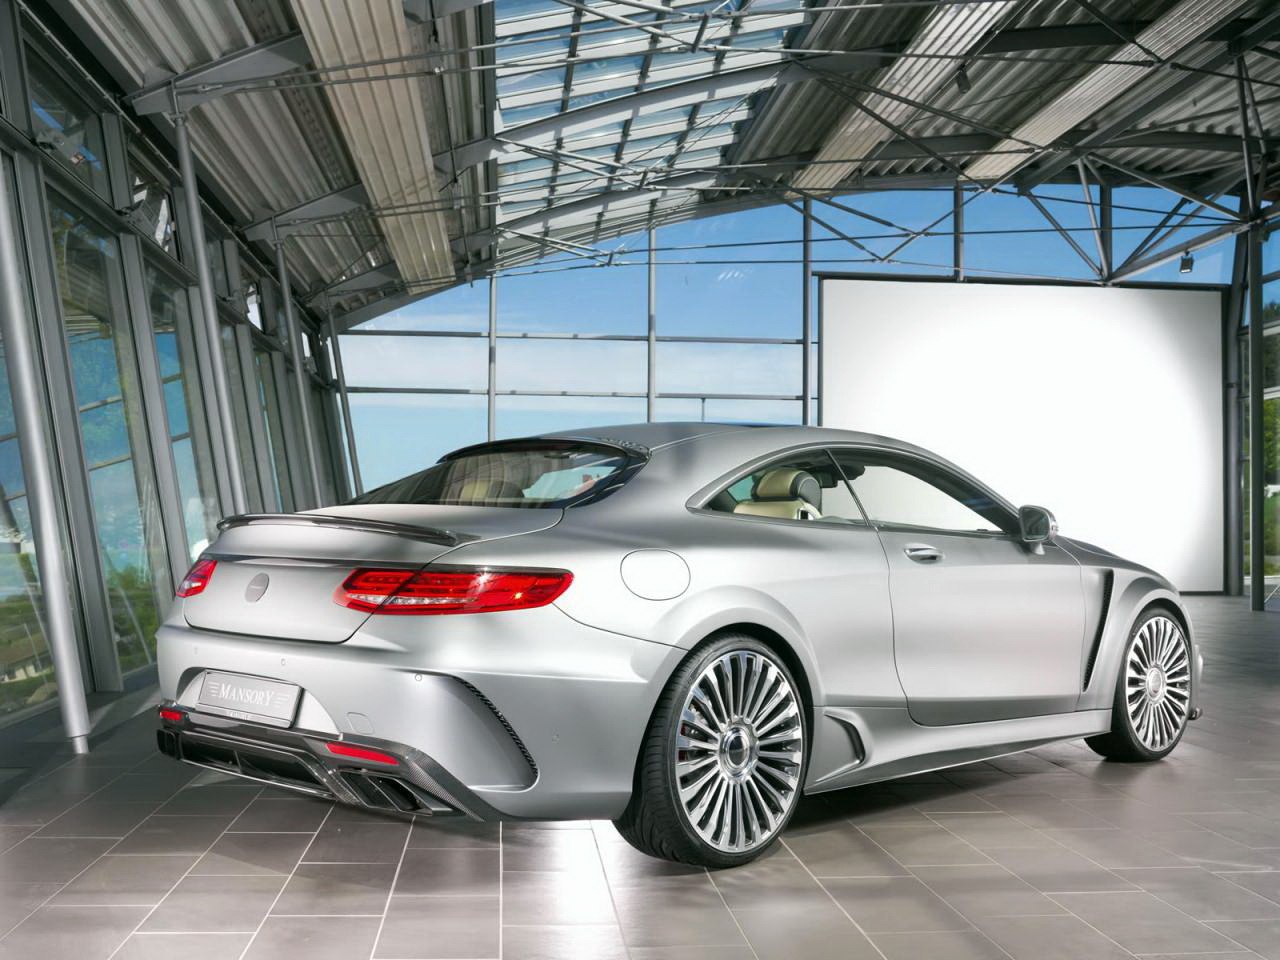    Mercedes-Benz S 63 AMG Coupe.  - Mansory ... - 4